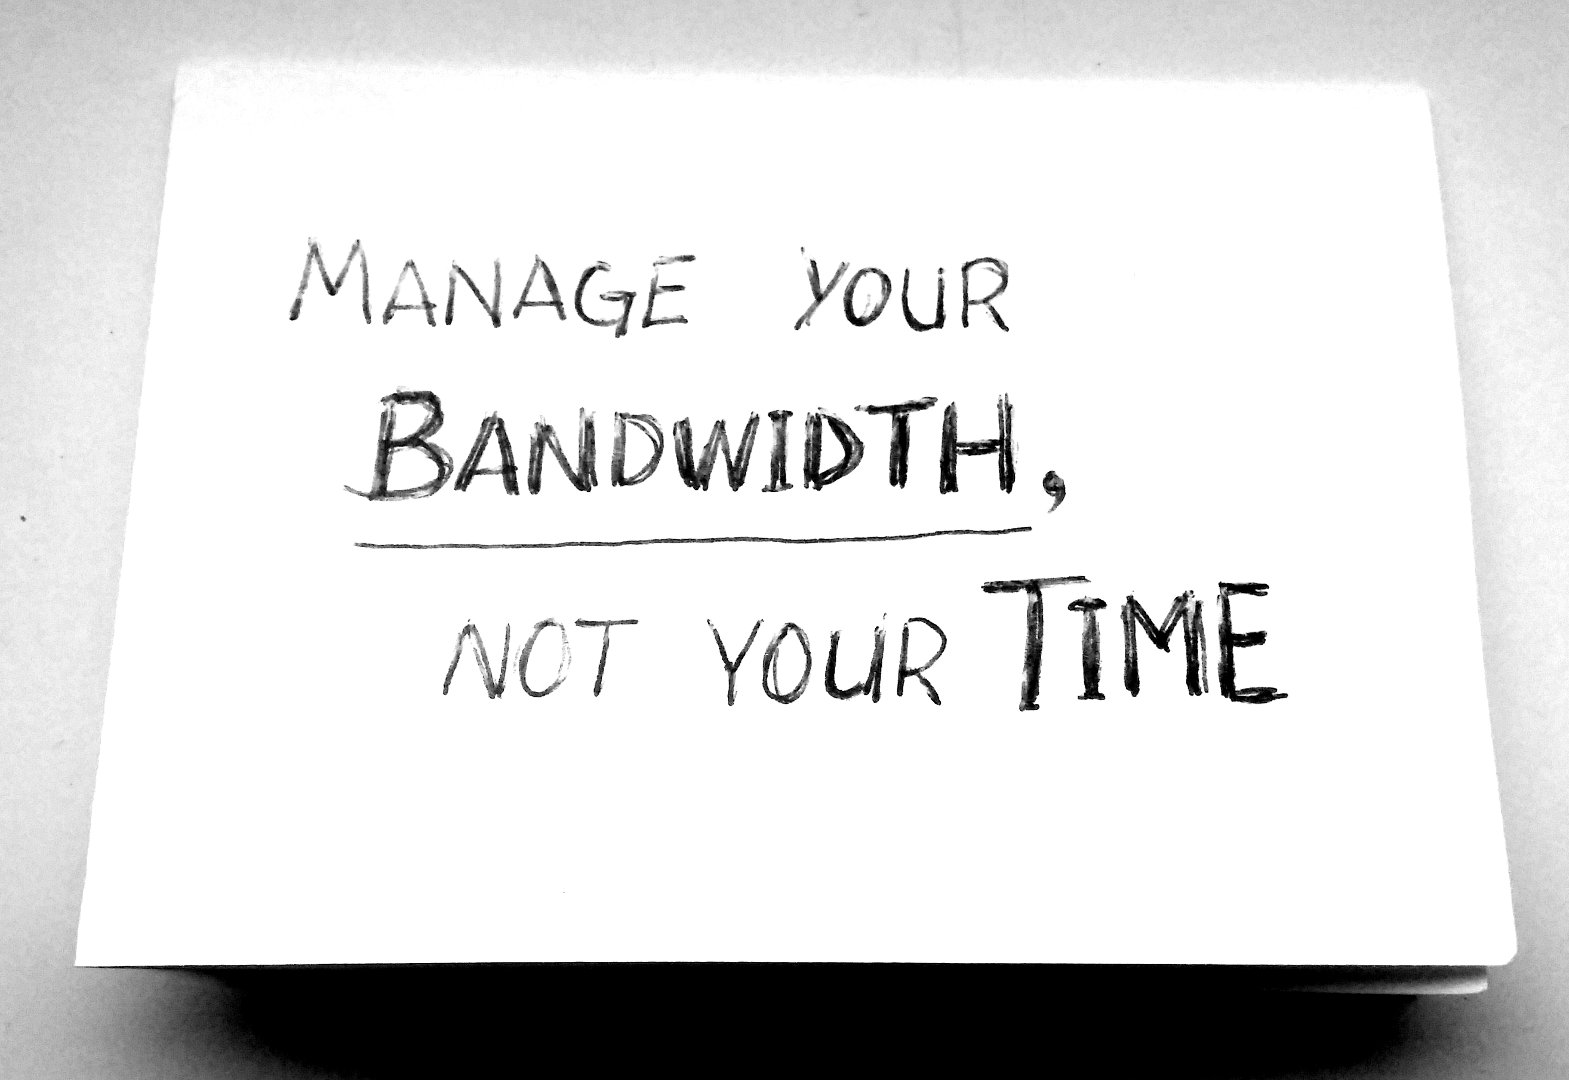 Manage your bandwidth, not your time